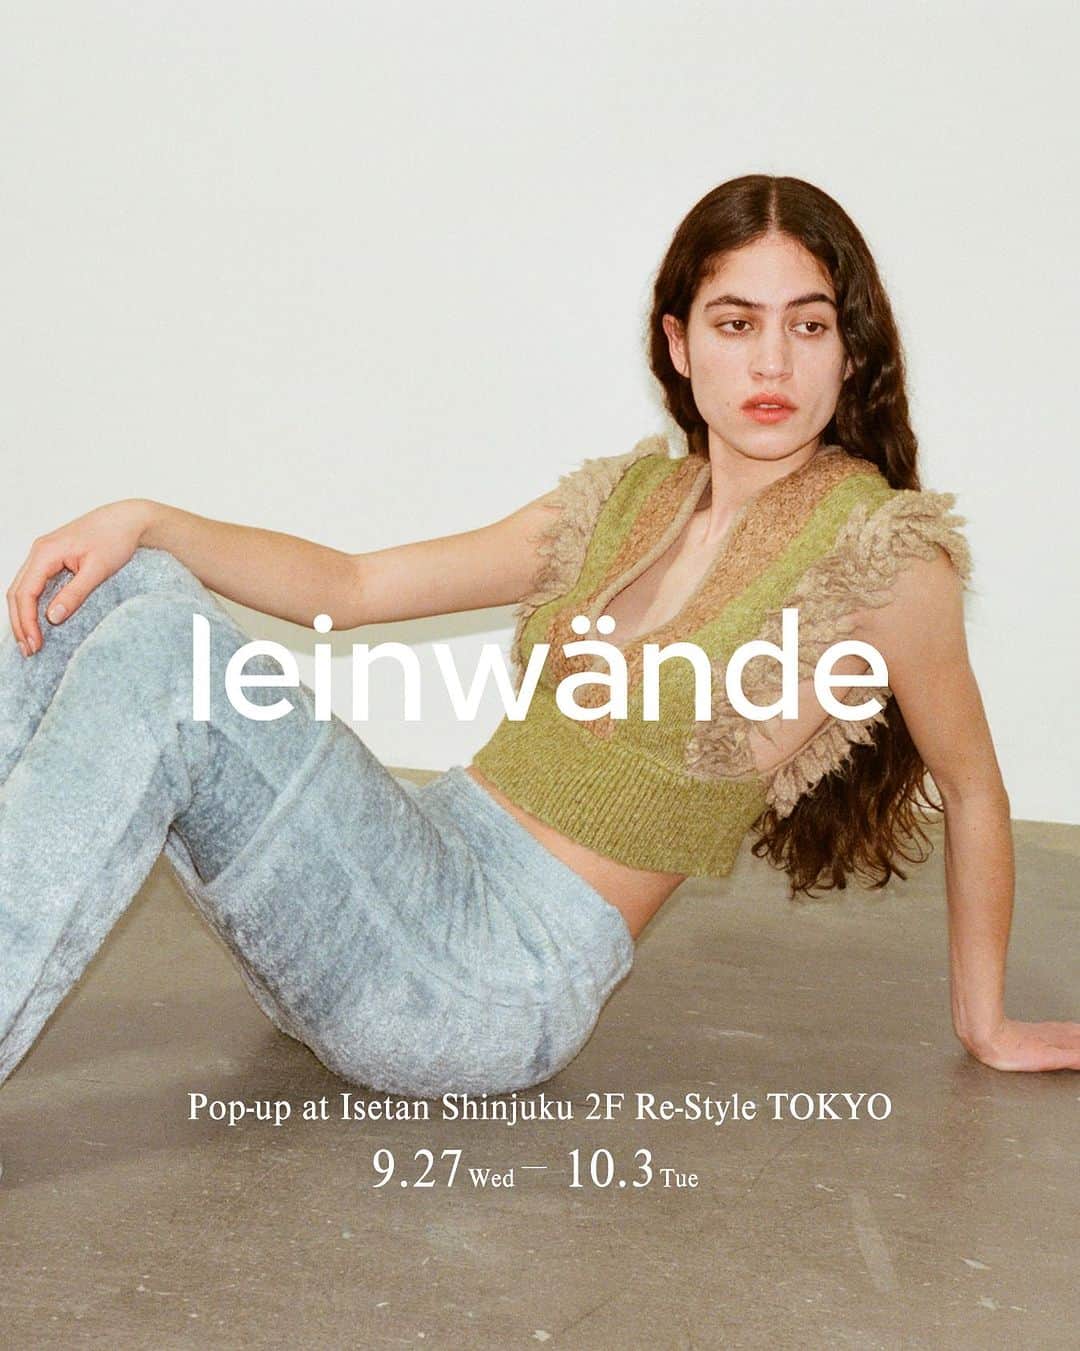 leinwande_officialのインスタグラム：「ㅤㅤㅤㅤㅤㅤㅤㅤㅤㅤㅤㅤㅤ  Pop-up at Isetan Shinjuku ［Re-Style TOKYO］from 9/27~10/3. @restyle_tokyo_isetanmitsukoshi ㅤㅤㅤㅤㅤㅤㅤㅤㅤㅤㅤㅤㅤ We will having a pop-up store at Isetan Shinjuku 2th floor［Re-Style TOKYO］ from 27th September to 3rd October. You will be able to see our 23autumn/winter collection. We are looking forward to you visiting. ㅤㅤㅤㅤㅤㅤㅤㅤㅤㅤㅤㅤㅤ 9/27(水)〜10/3(火)まで、伊勢丹新宿店本館2階［Re-Style TOKYO］にてPop-up storeを開催いたします。 leinwände 23autumn/winterの新作コレクションを実際にお手に取ってご覧いただく、特別な機会となります。 皆さまのご来店を心よりお待ちいたしております。 ㅤㅤㅤㅤㅤㅤㅤㅤㅤㅤㅤㅤㅤ #leinwände #leinwande」